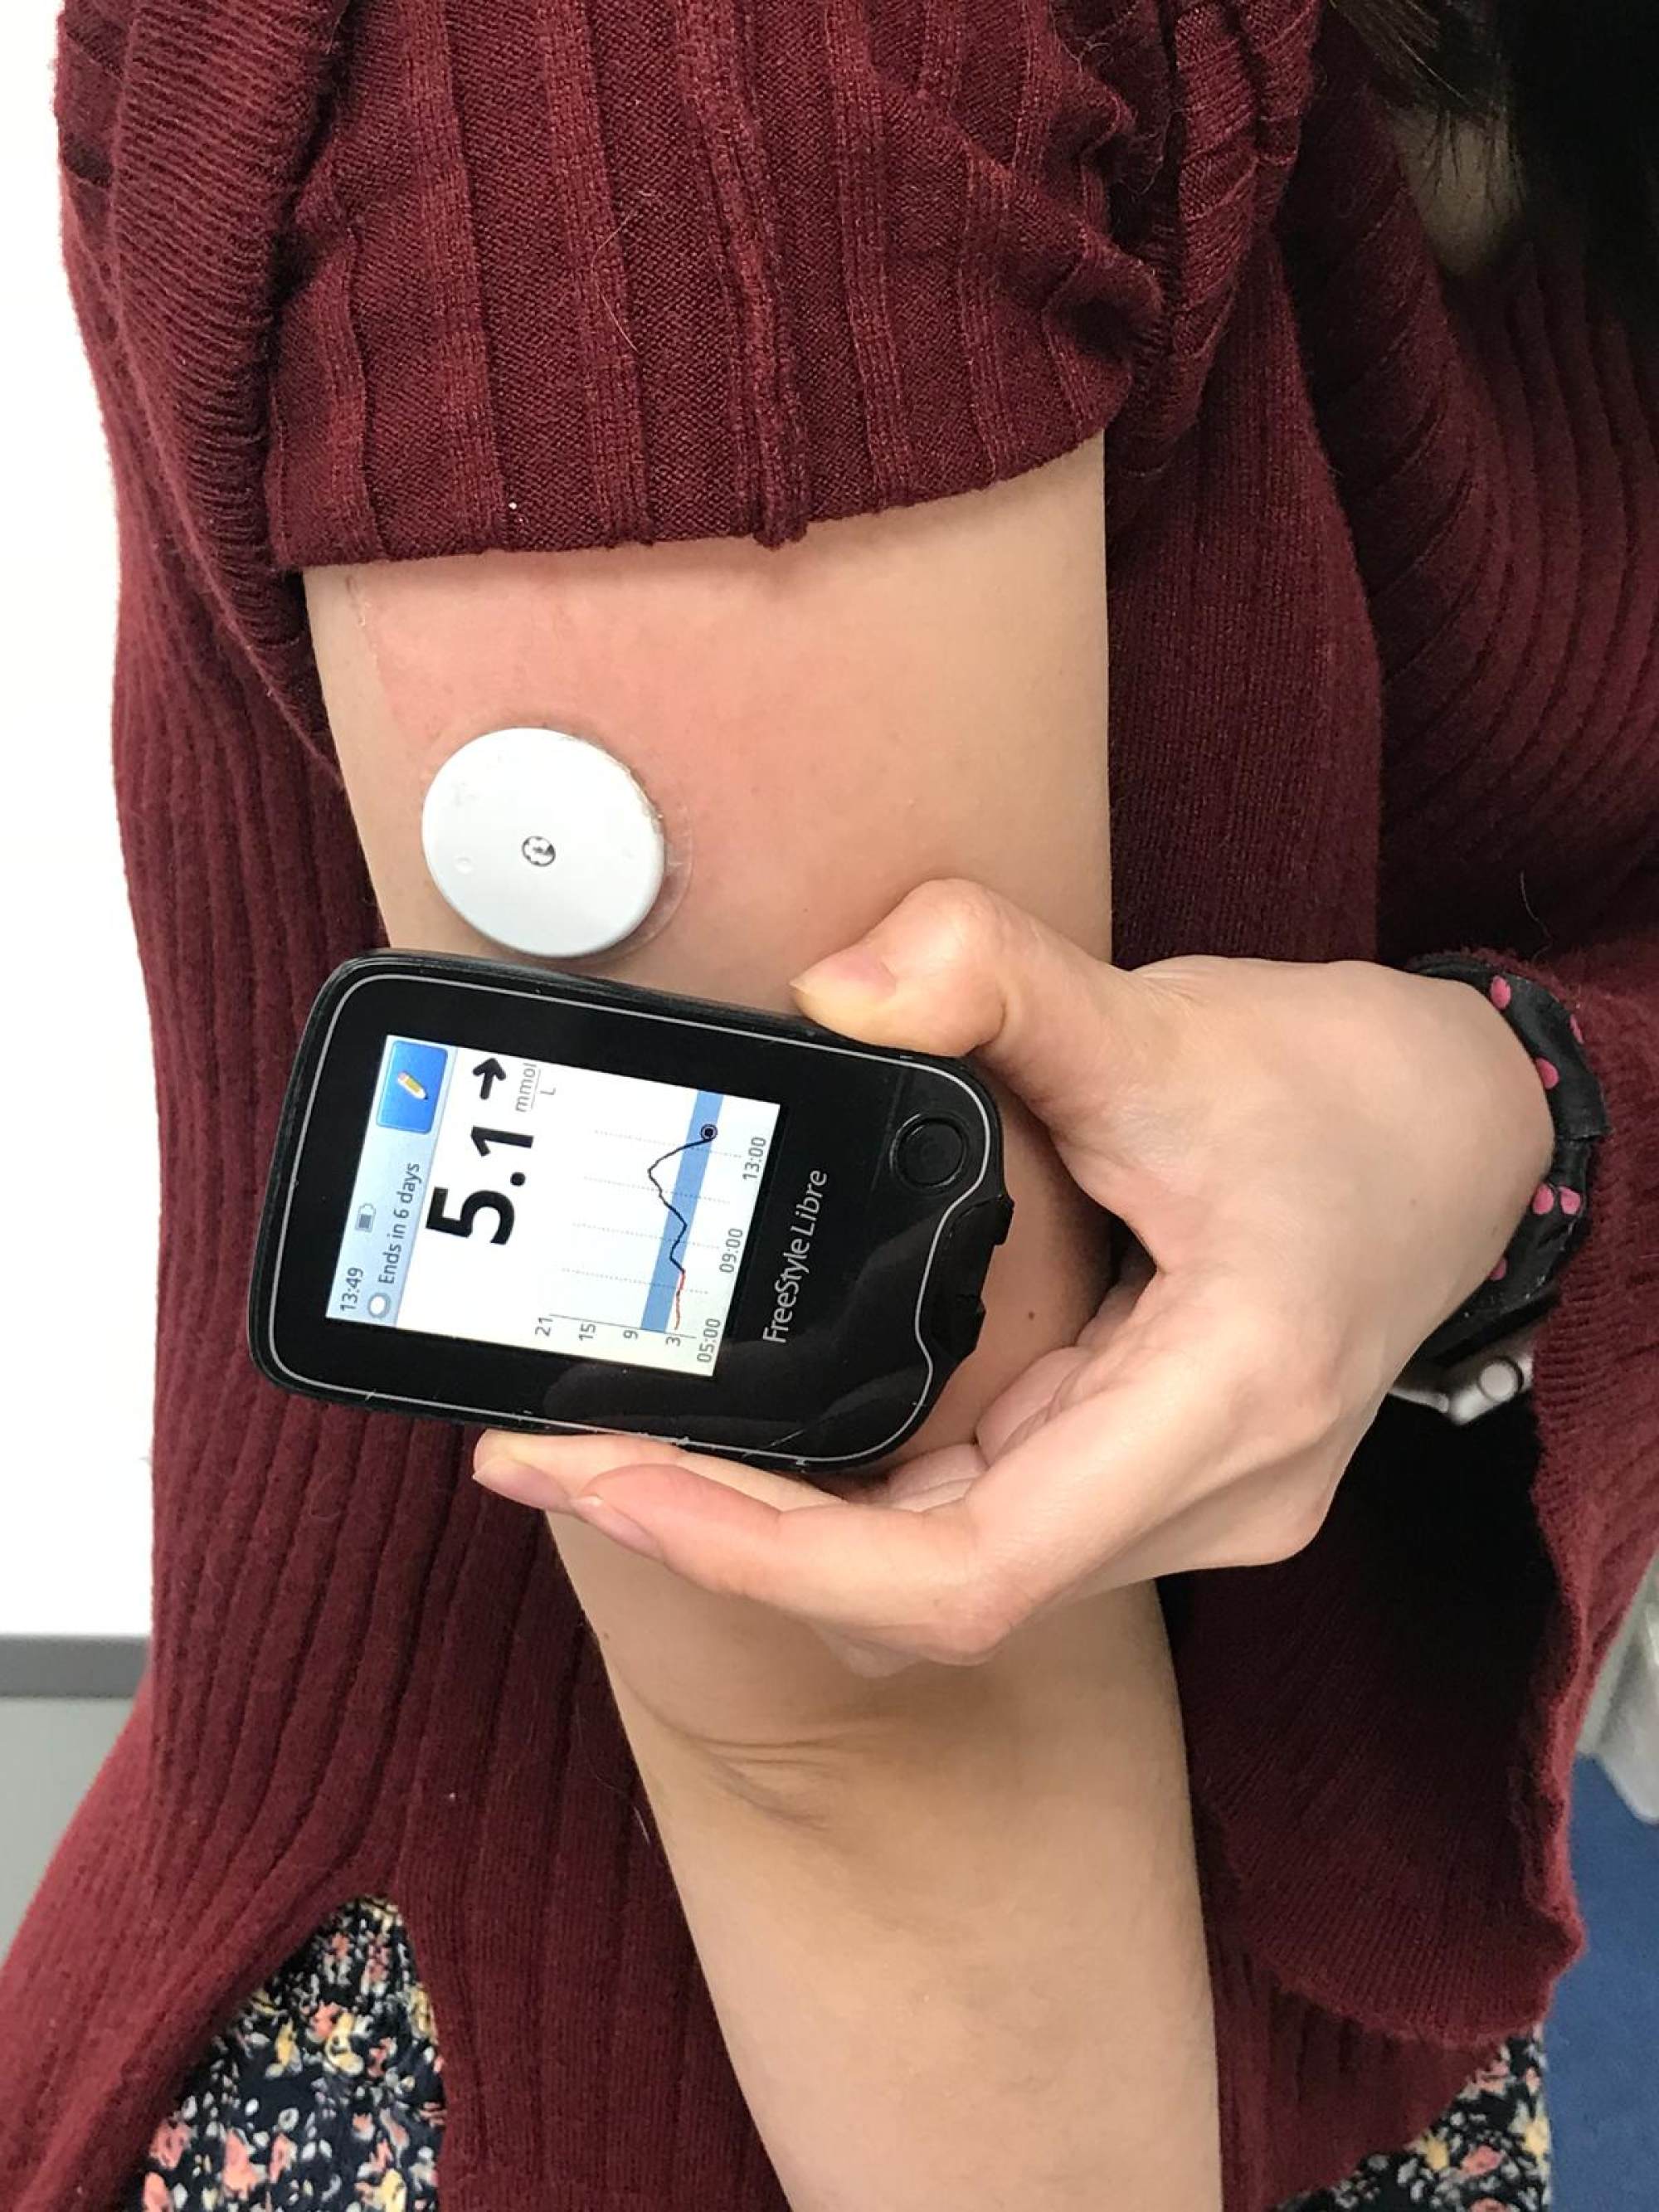 One Drop becomes first and only wireless blood glucose monitoring system to  connect directly to Apple Watch.